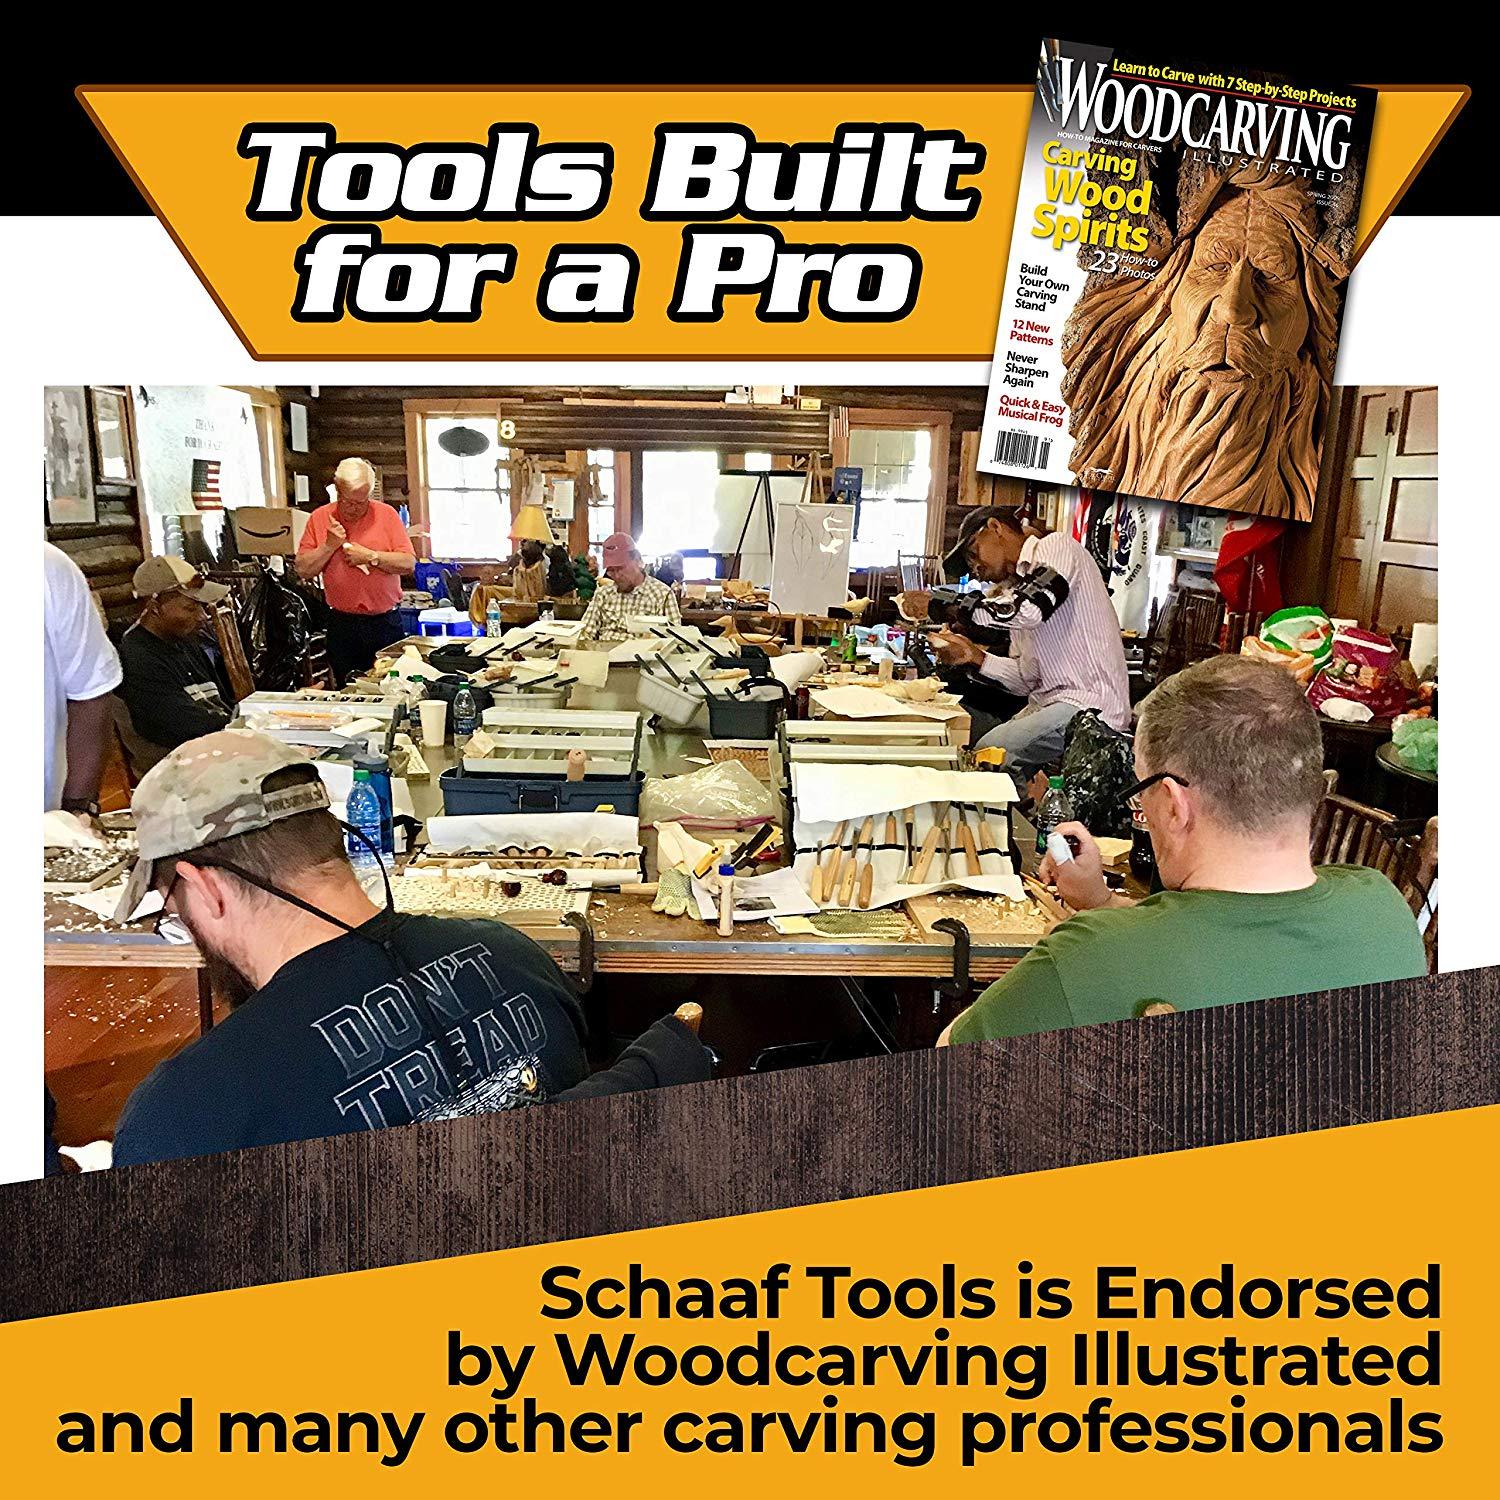 Woodcarving Illustrated endorsement of Schaaf tools